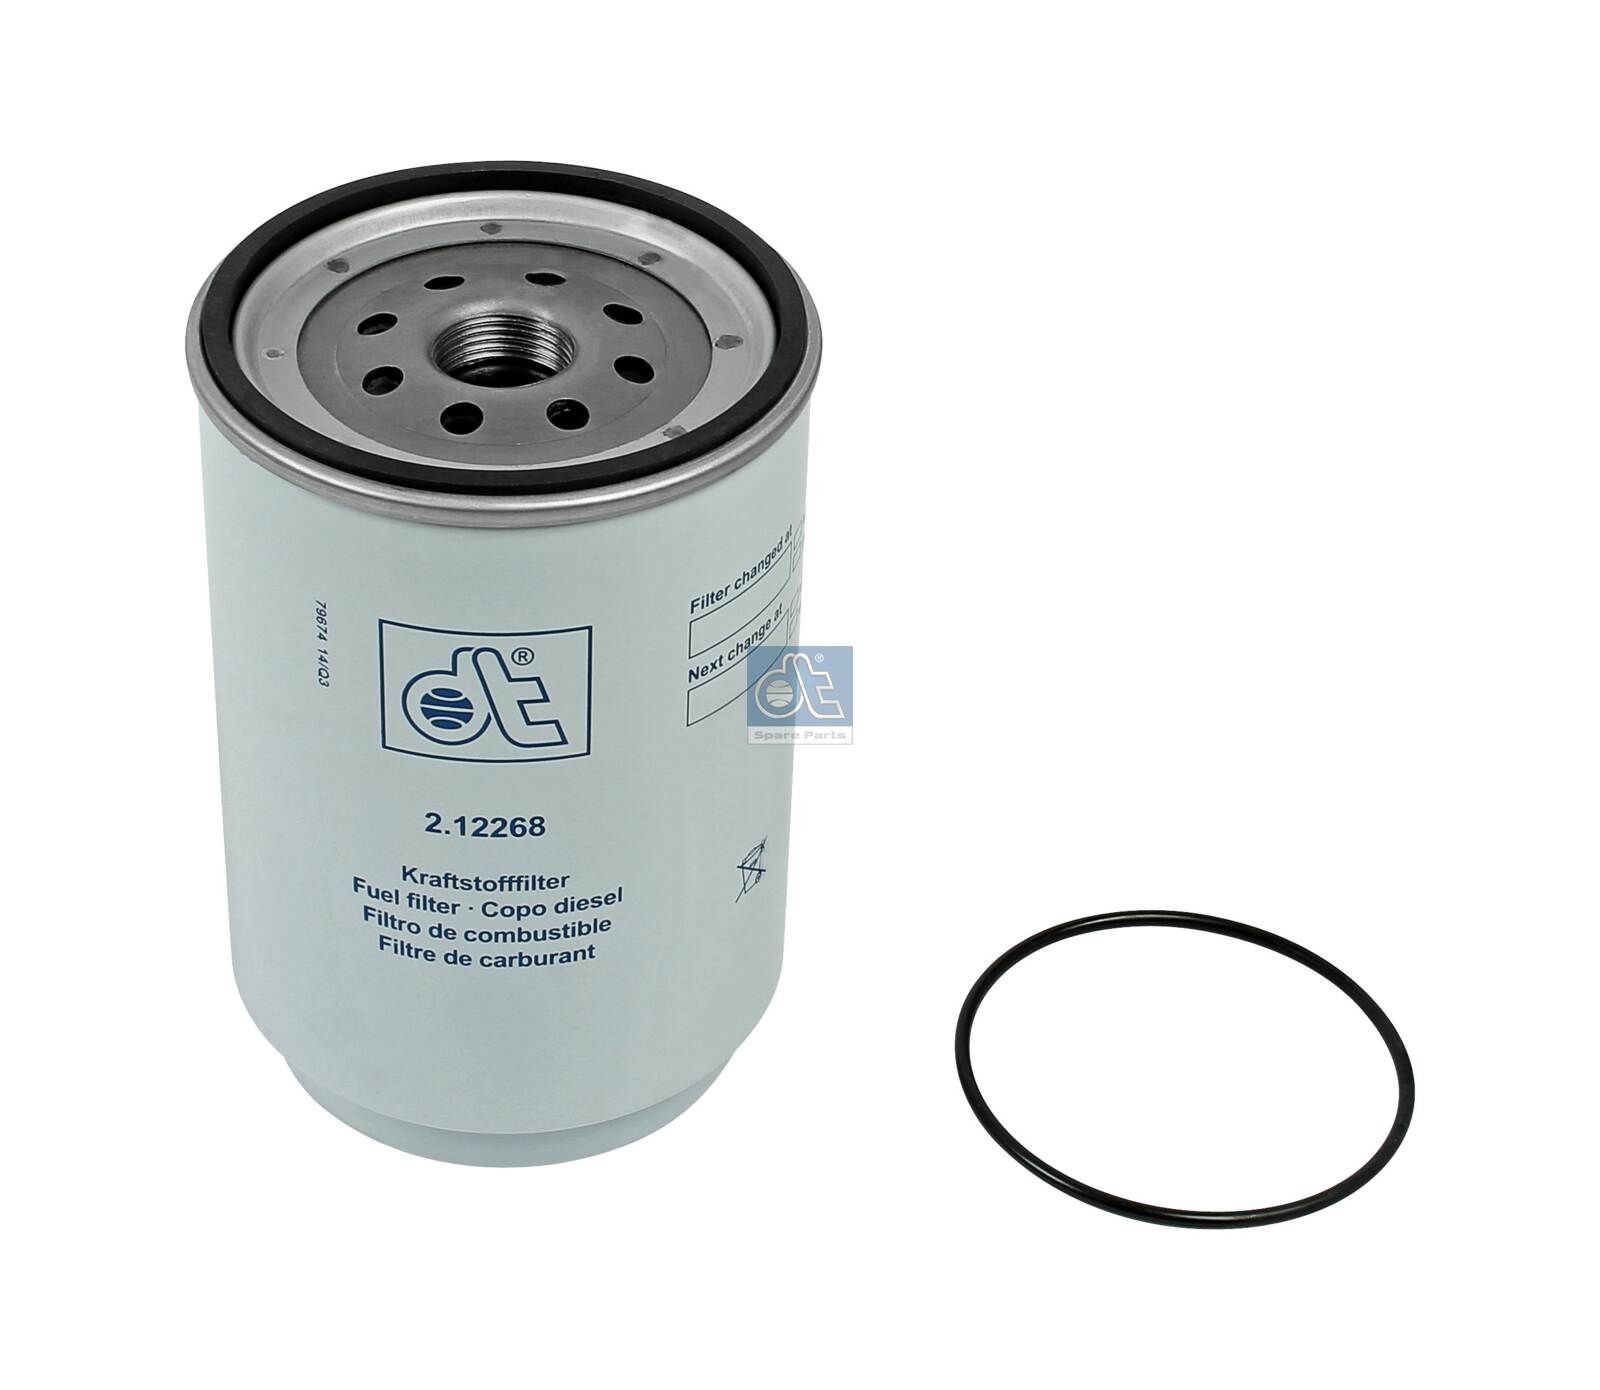 WK 11 001 x DT Spare Parts 2.12268 Fuel filter 7420 998 349